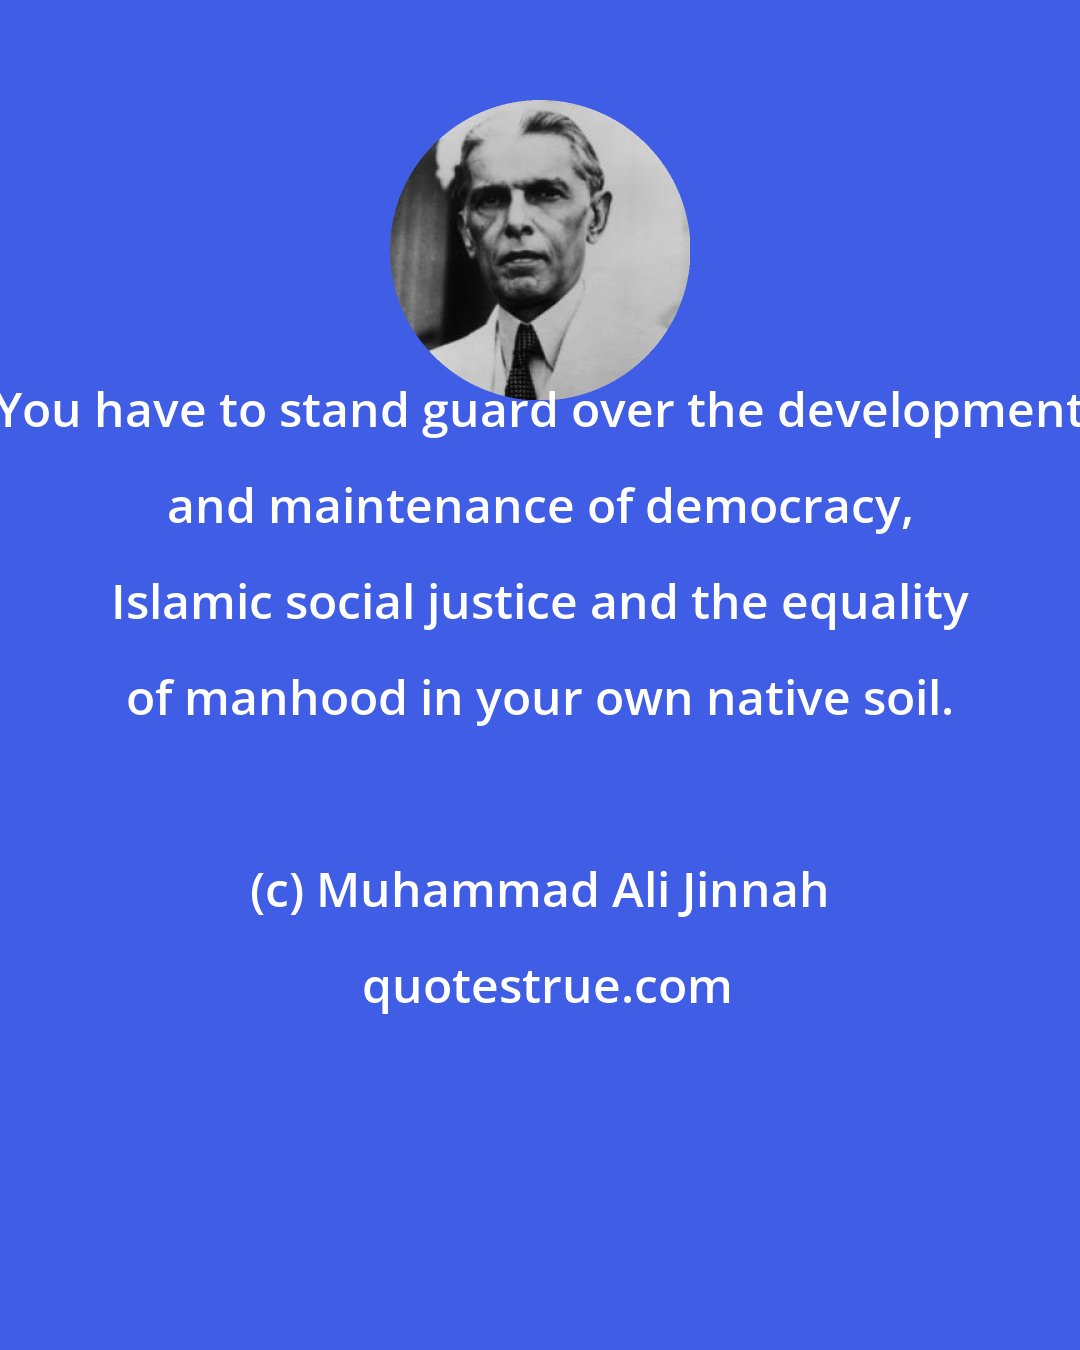 Muhammad Ali Jinnah: You have to stand guard over the development and maintenance of democracy, Islamic social justice and the equality of manhood in your own native soil.